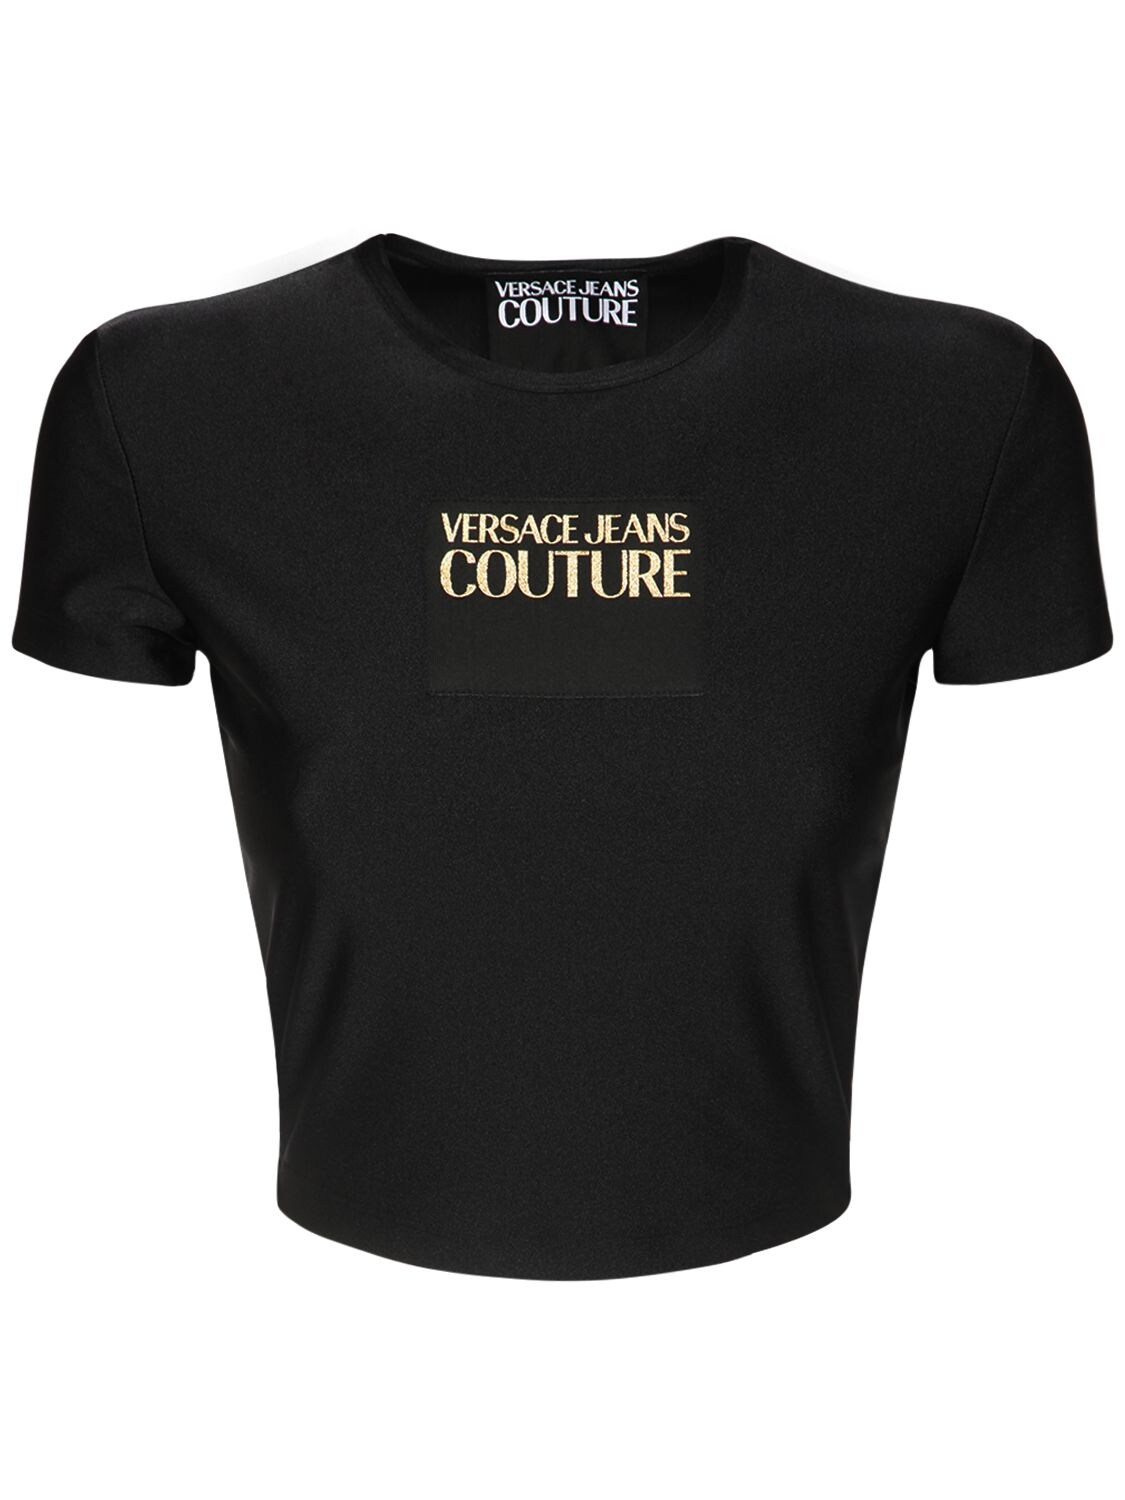 gucci jeans couture t shirt